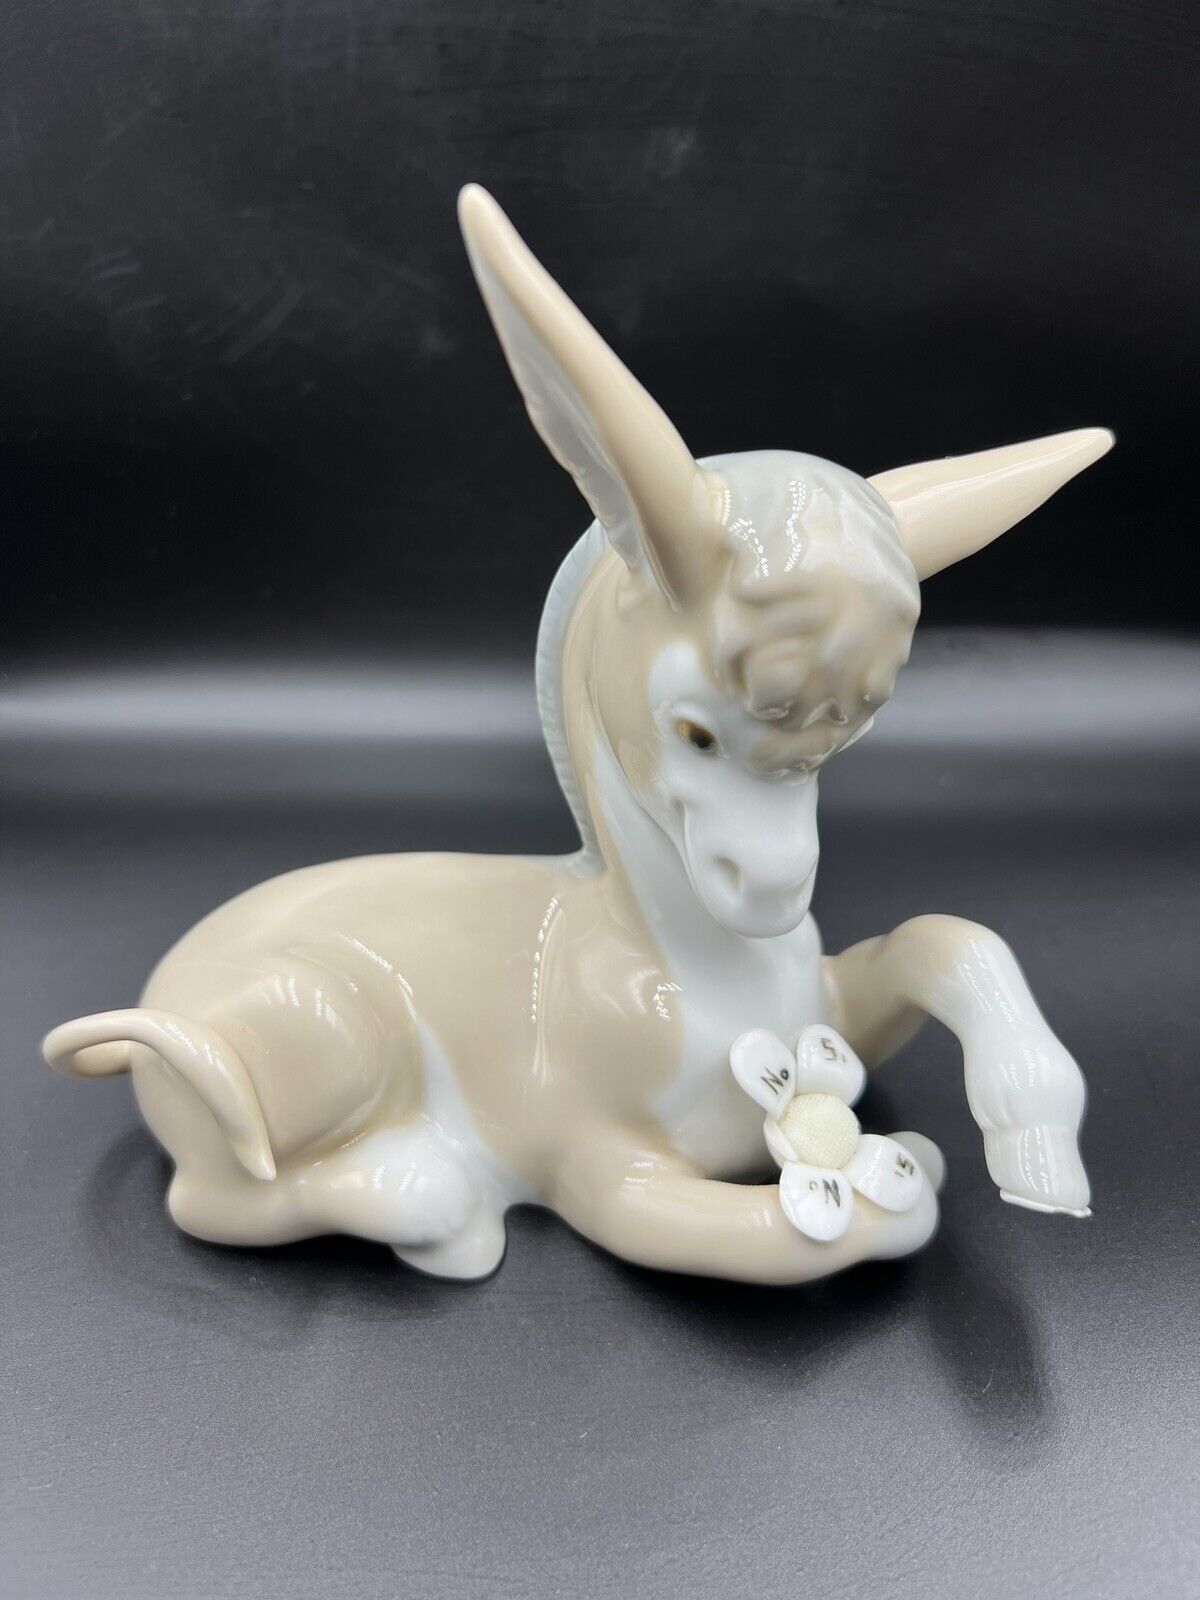 ADORABLE LLADRO FIGURINE, DONKEY IN LOVE, GLAZED, 4524G; VINTAGE COLLECTIBLE